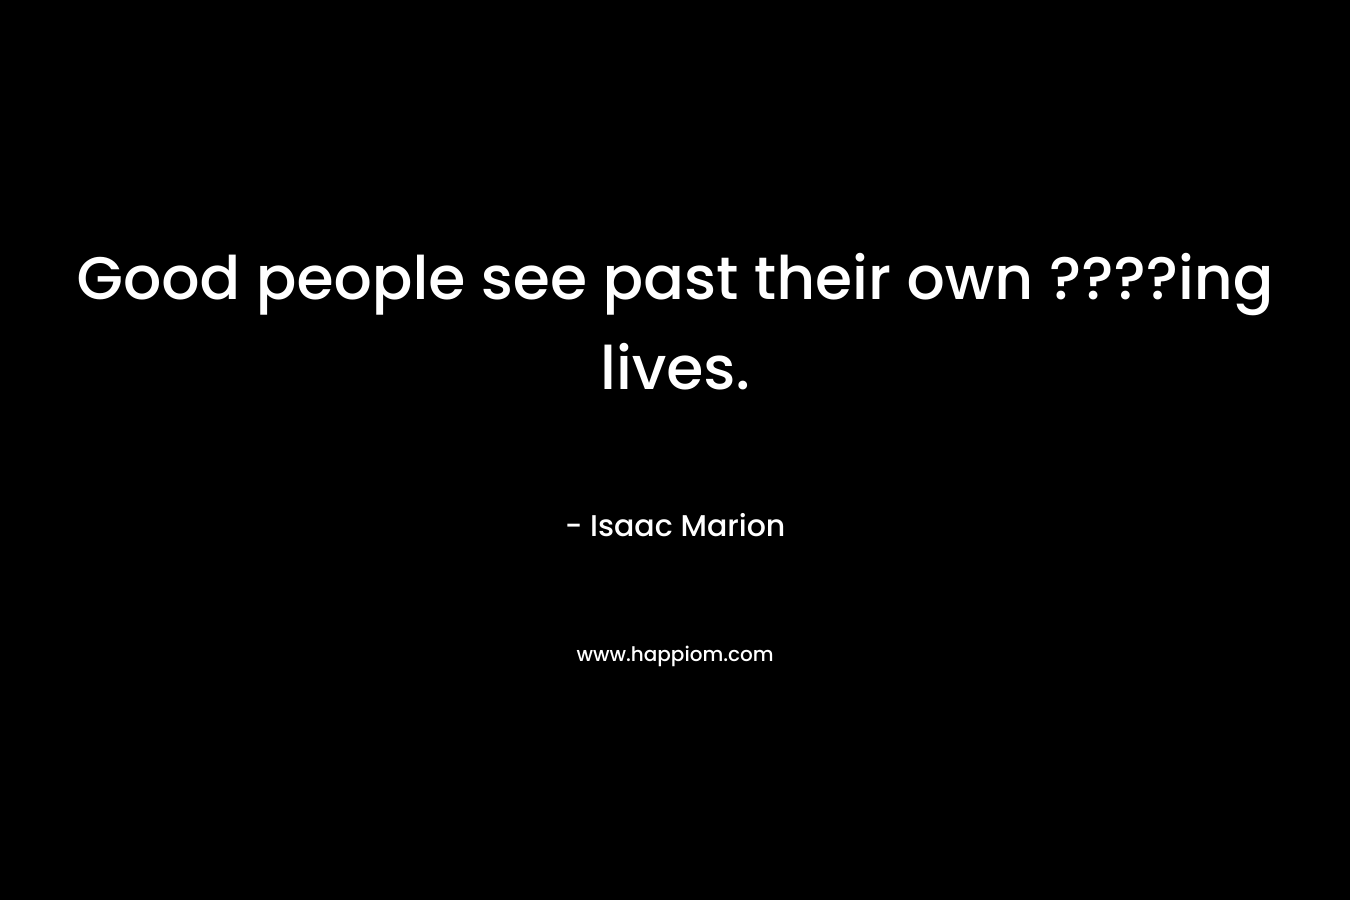 Good people see past their own ????ing lives.